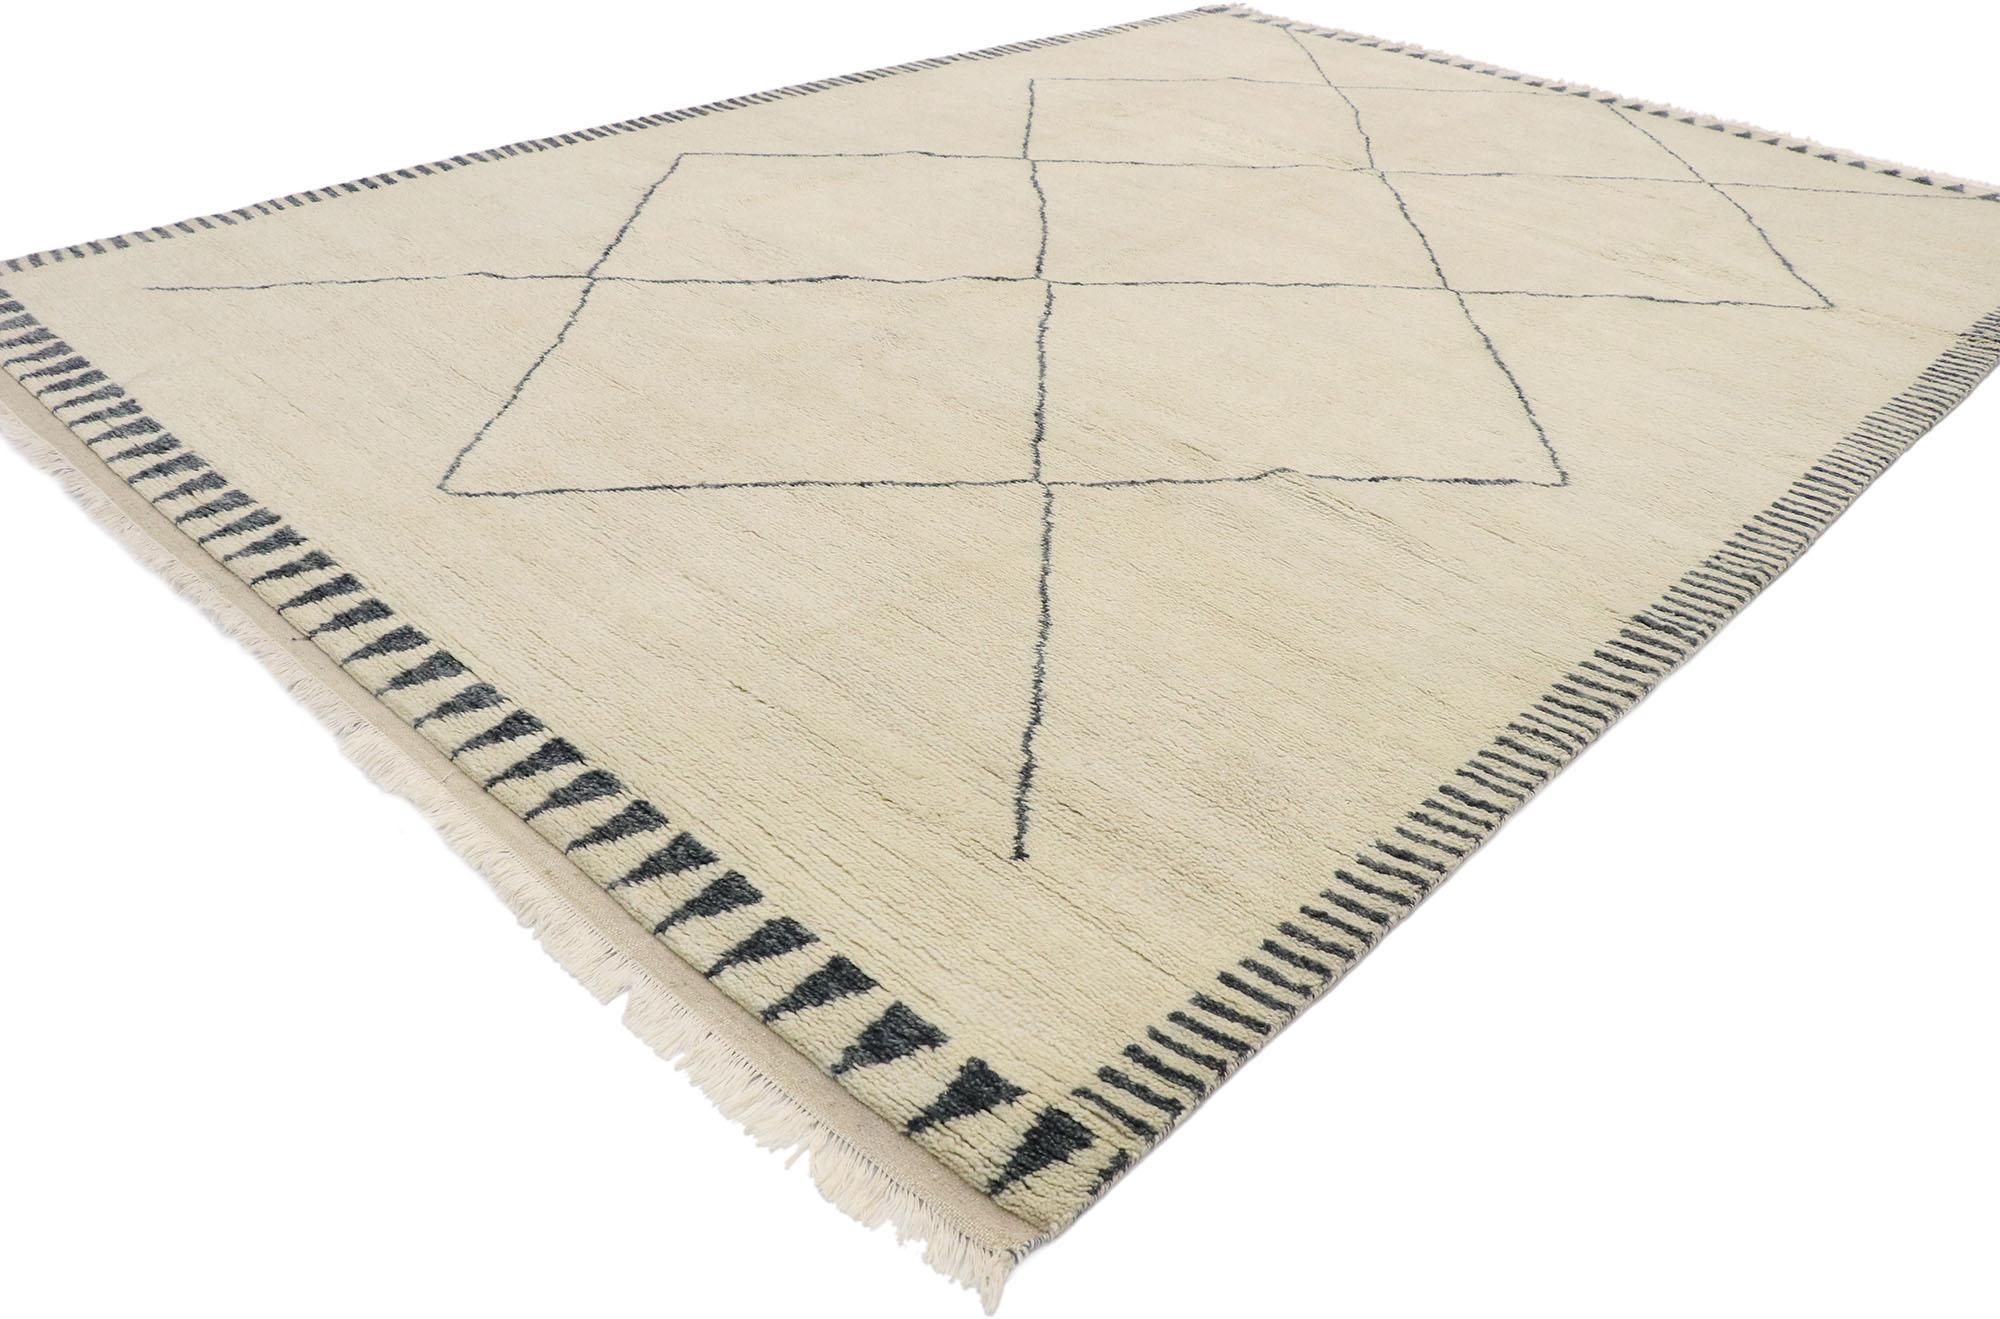 30532 New Contemporary Moroccan style rug with Minimalist midcentury design. This hand knotted wool contemporary Moroccan area rug features contrasting charcoal-blackish lines running the length of the beige backdrop. The thin lines crisscross in an